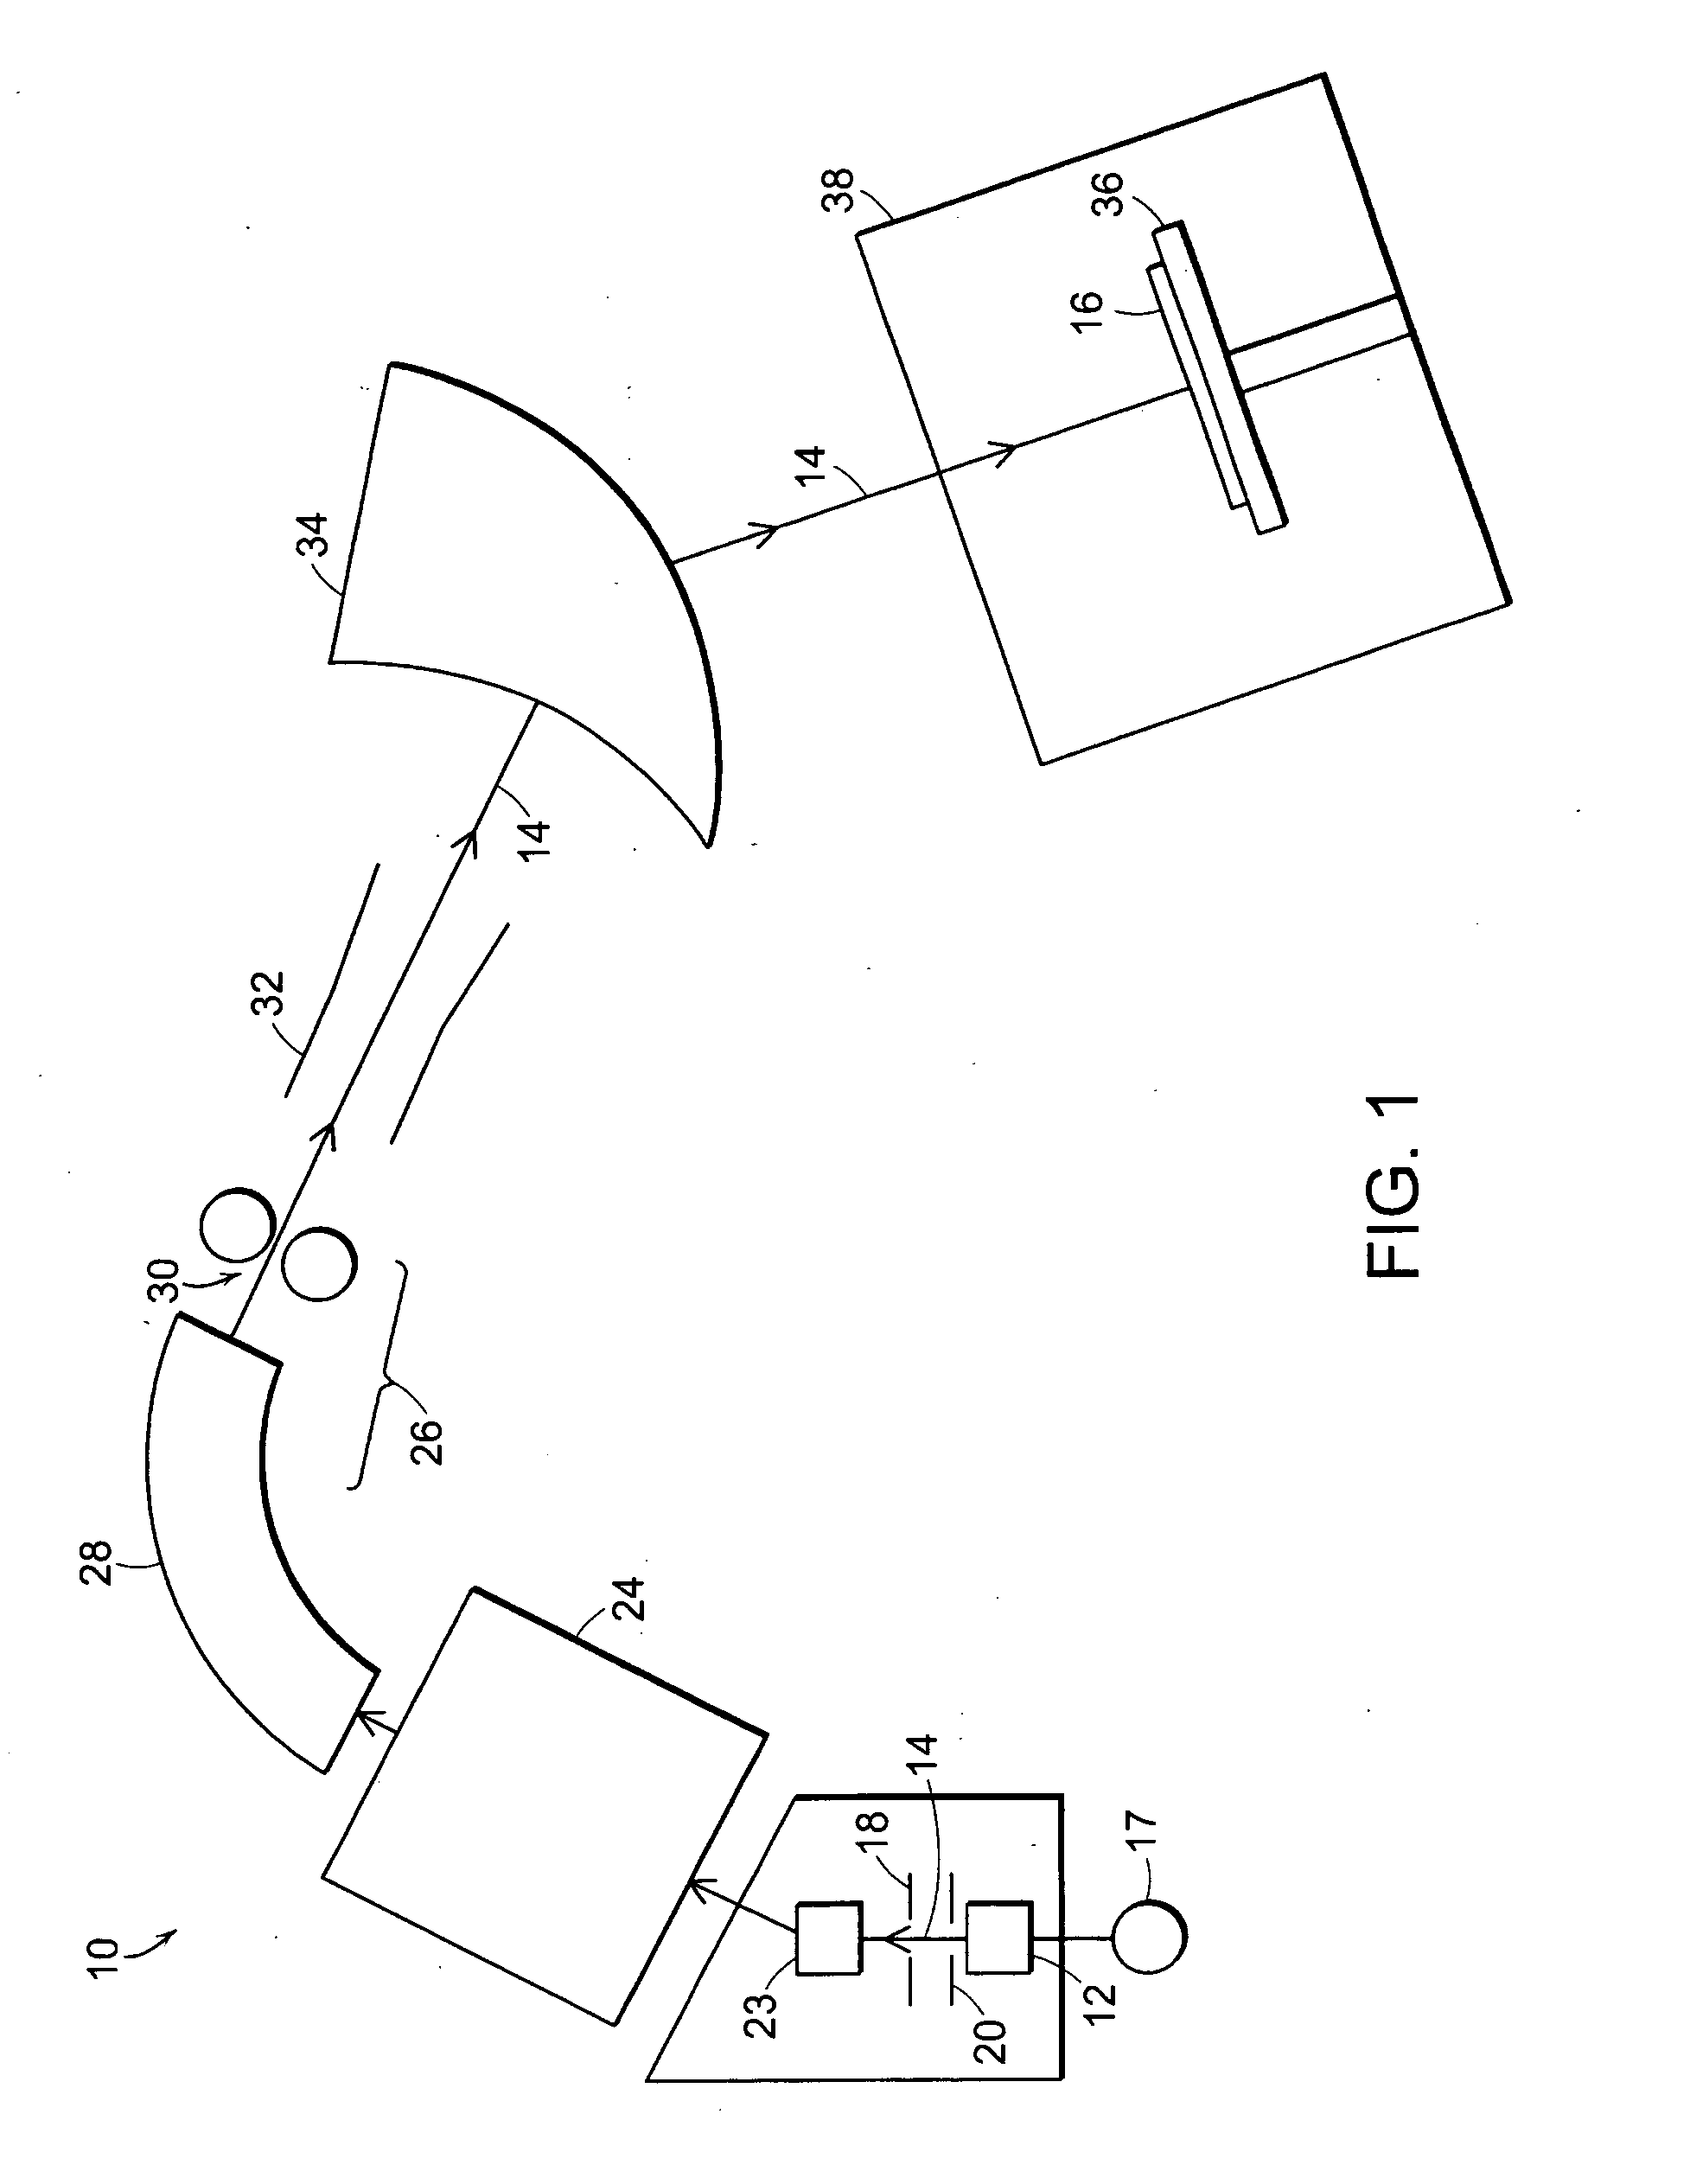 Methods of implanting ions and ion sources used for same